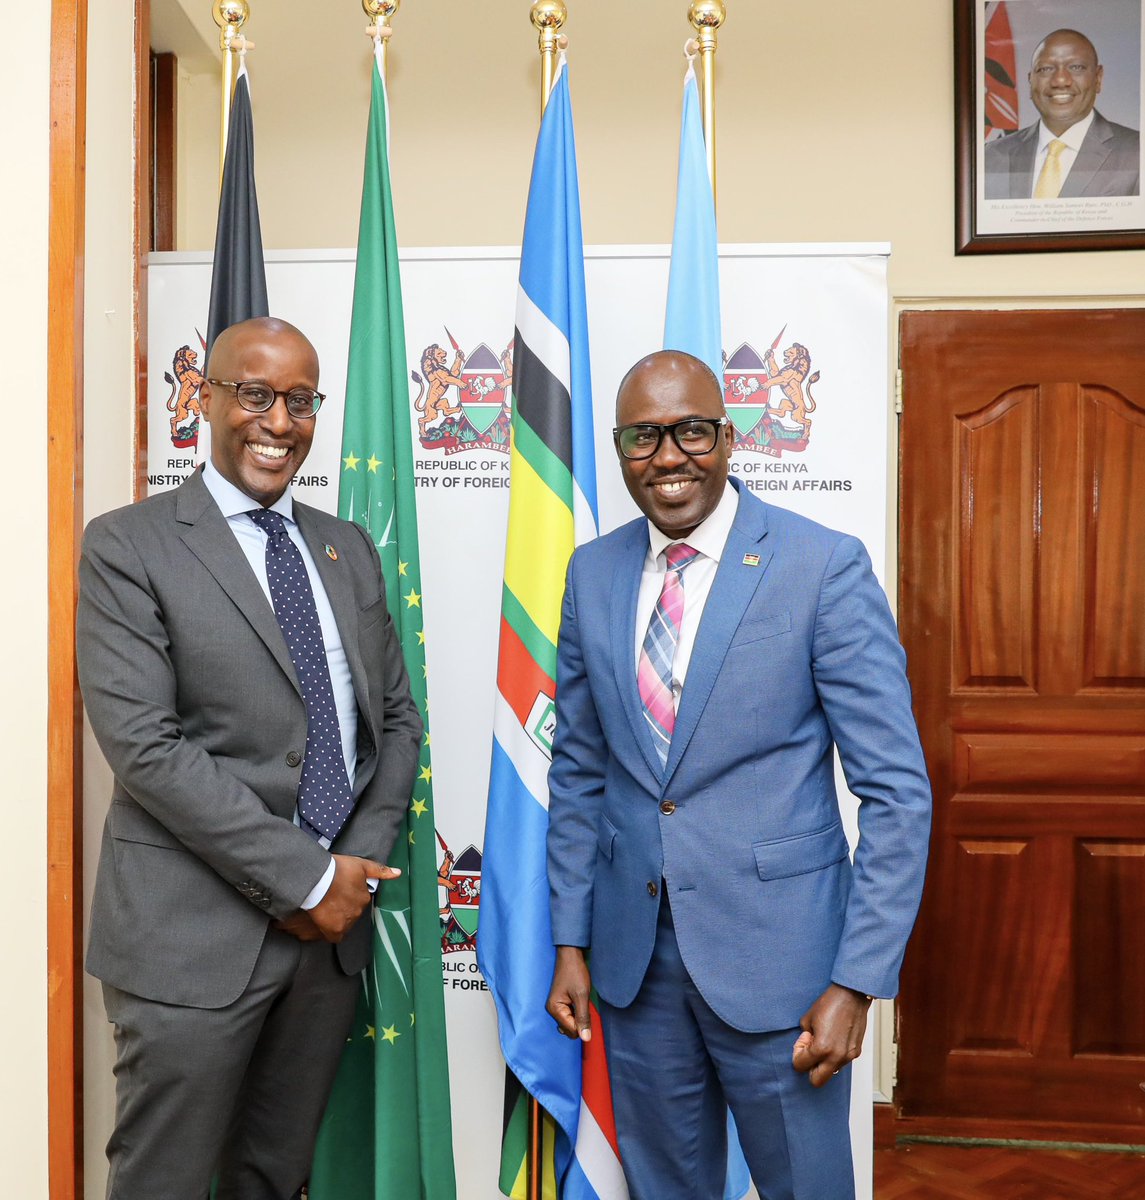 Grateful to PS @SingoeiAKorir for an excellent discussion on both our partnership & efforts underway to land the #Timbuktoo initiative in🇰🇪 targeting start-ups & entrepreneurs across Africa by mobilizing & investing US$1bn of catalytic & early stage risk capital @timbuktooafrica